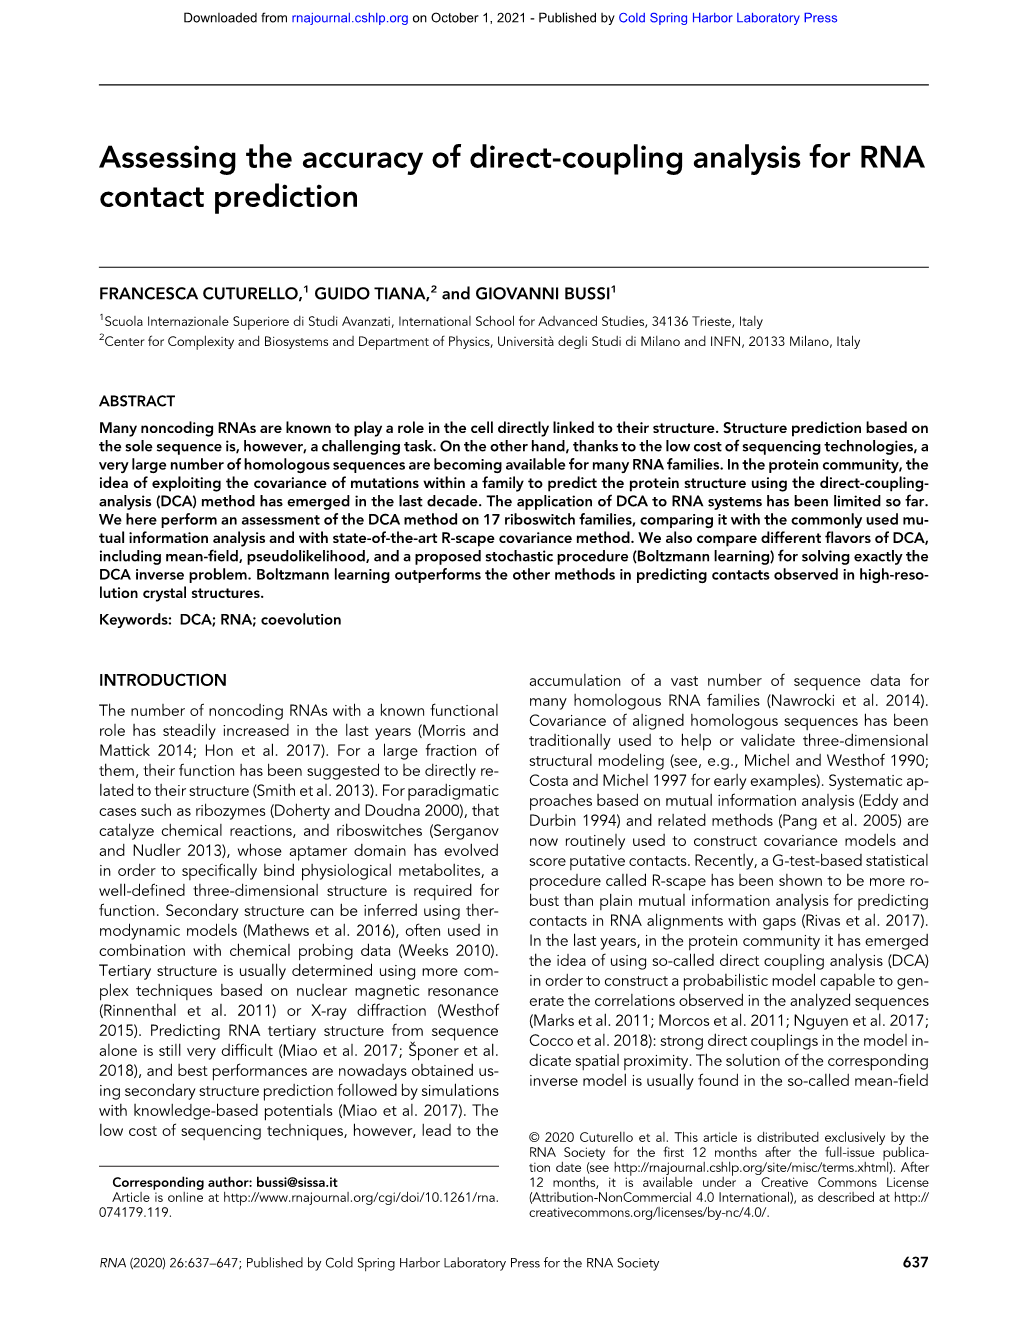 Assessing the Accuracy of Direct-Coupling Analysis for RNA Contact Prediction